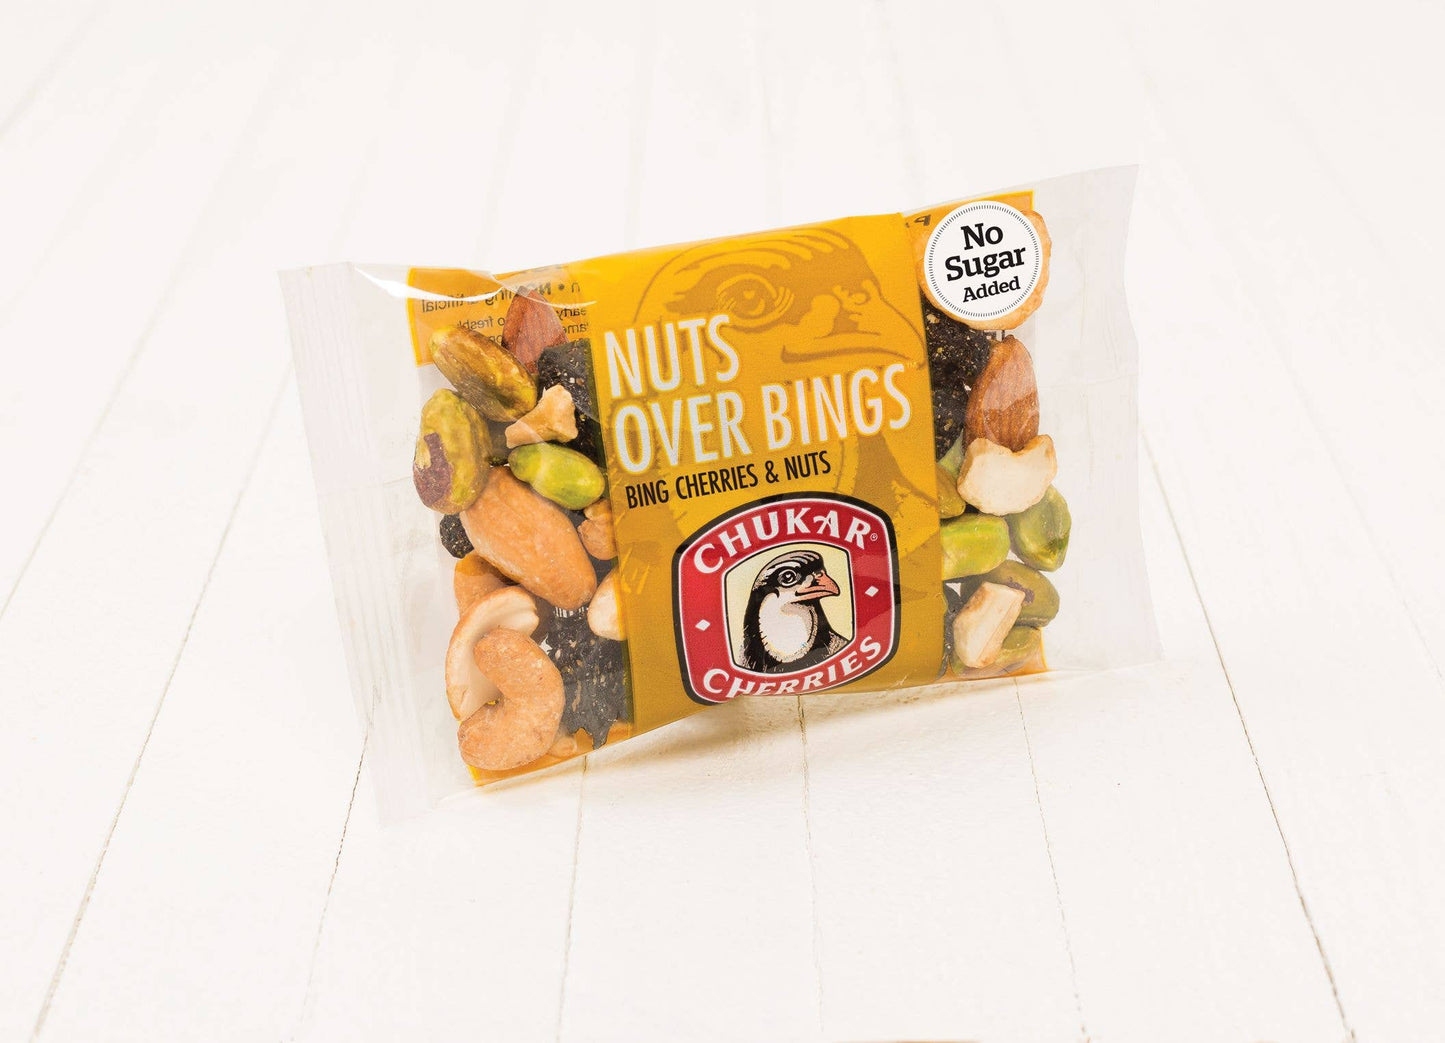 Nuts Over Bings - Fruit and Nut Energy Mix - 1.85 oz